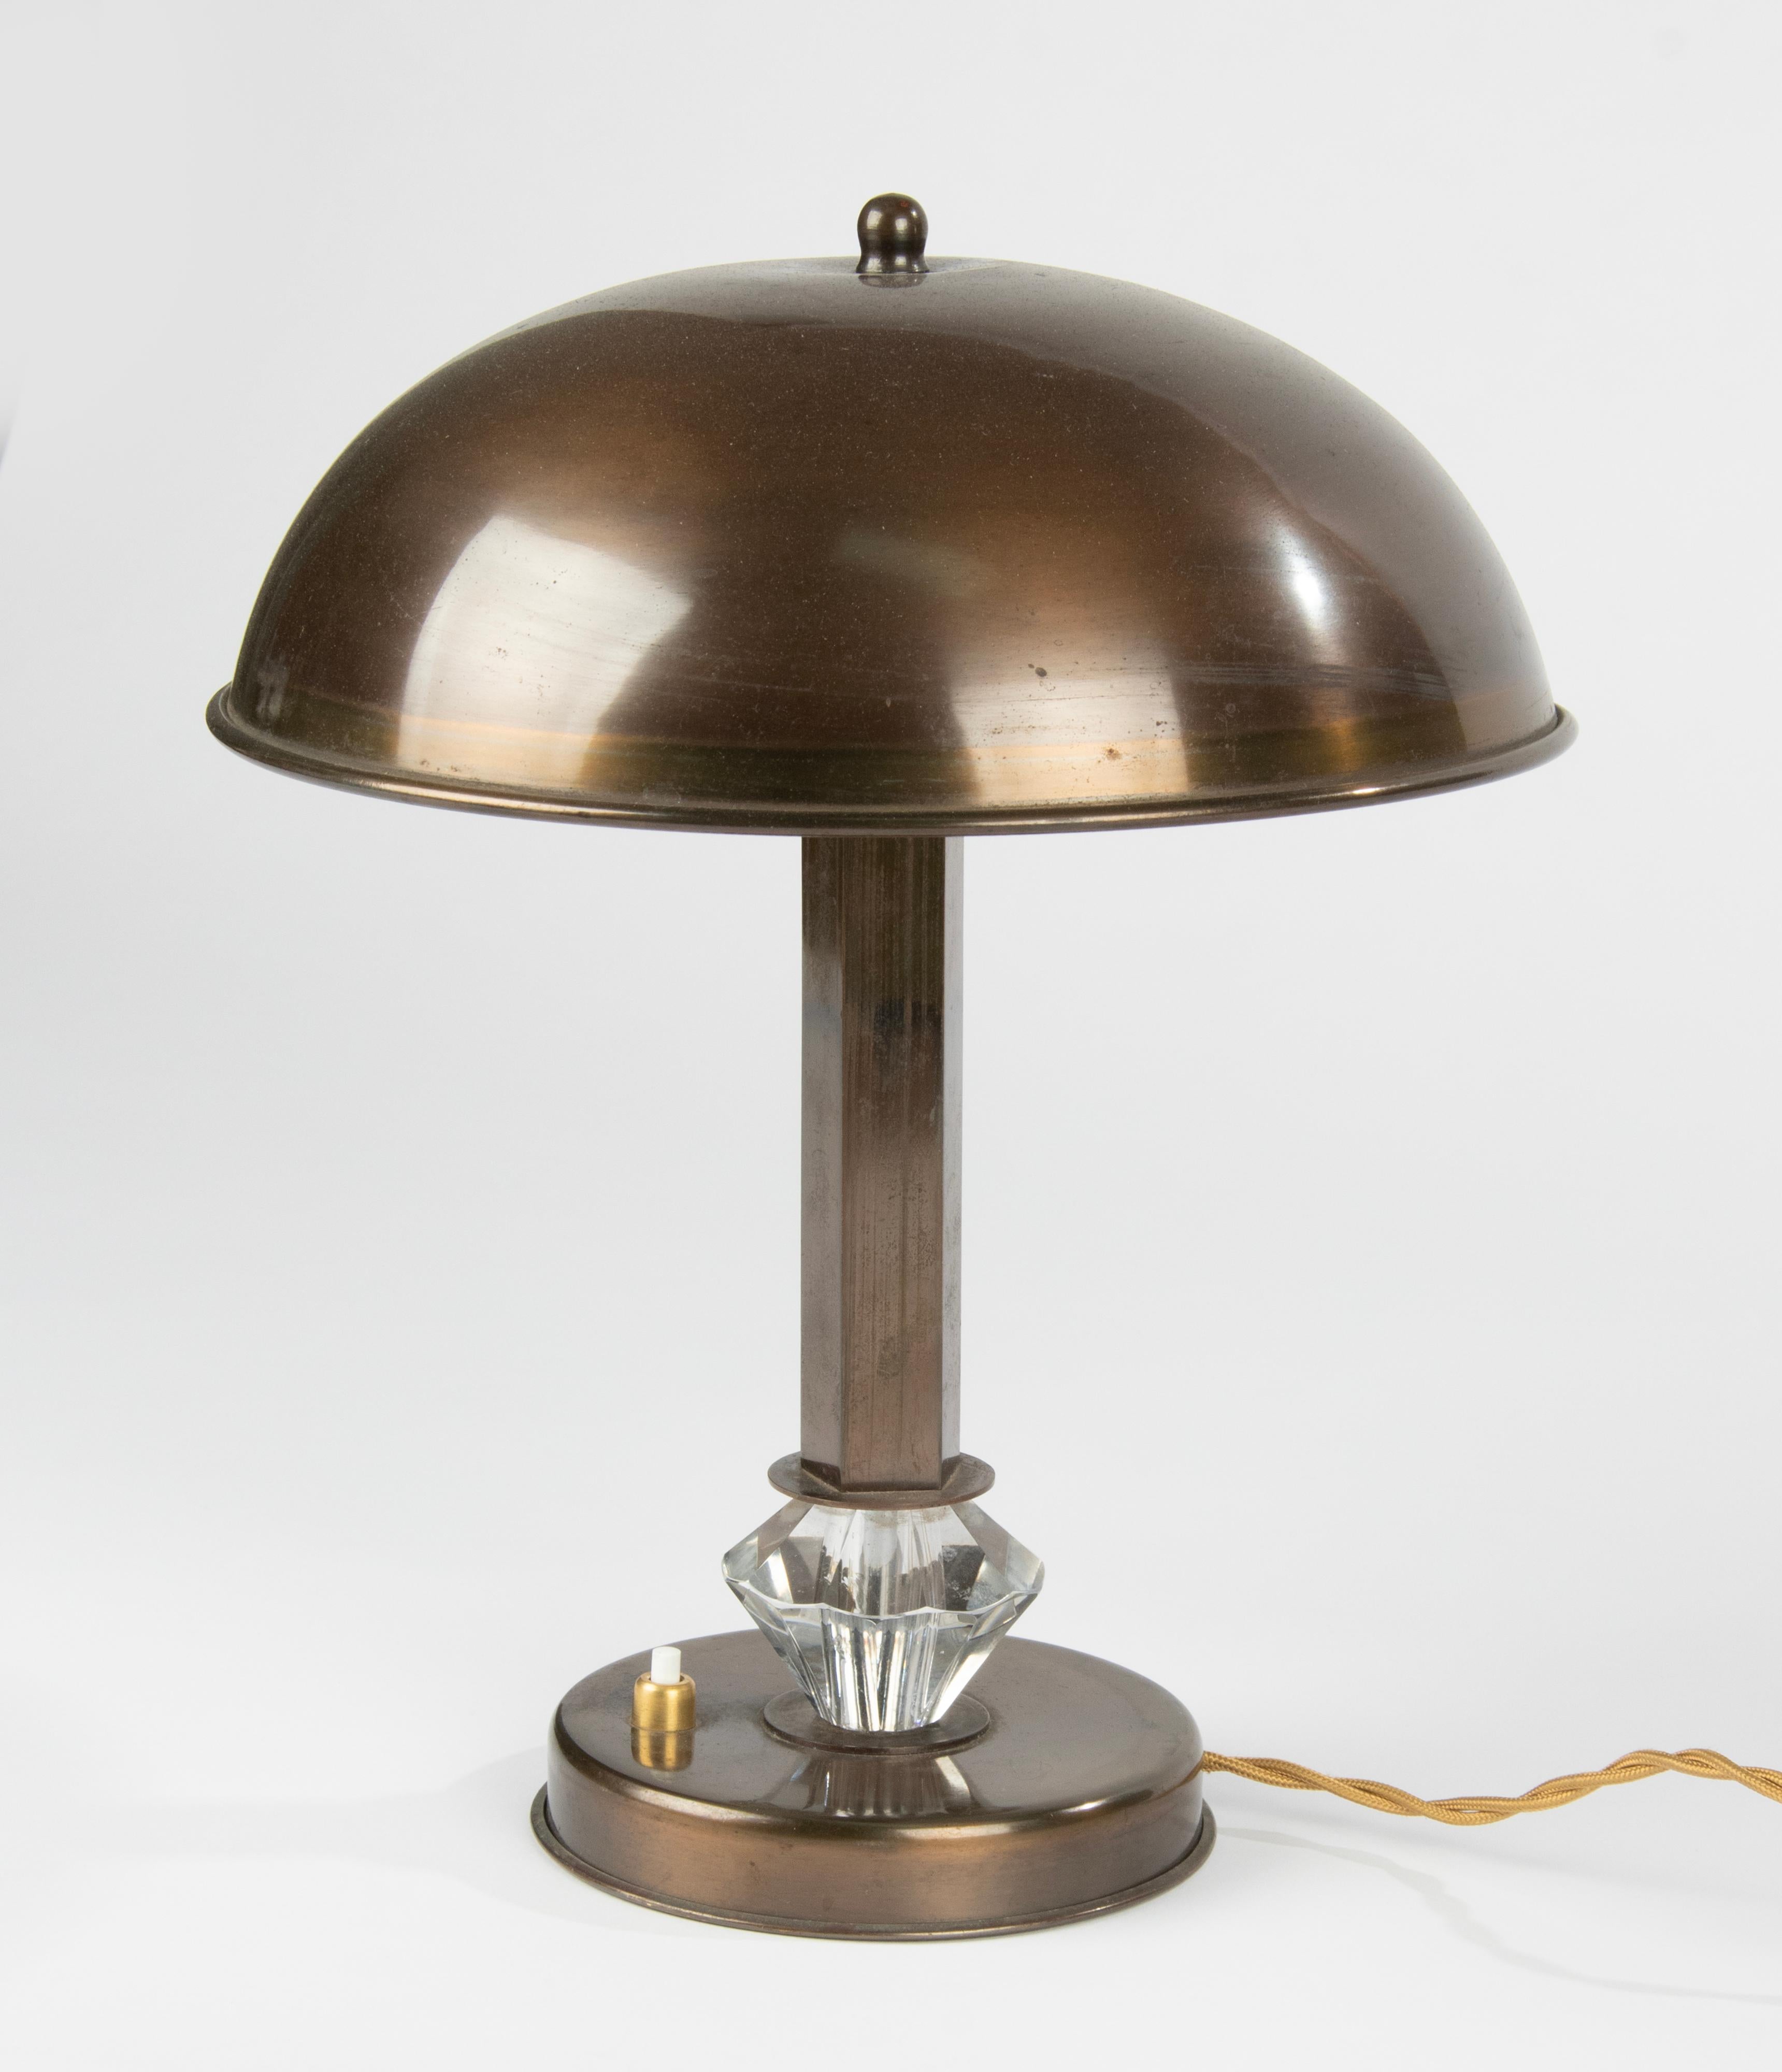 An elegant Art Deco style table or desk lamp, made of copper colored metal. At the bottom of the stem a crystal cut knop. The lamp has a two E27 lamp fittings. The lamp is in working order, the switch also functions. 
Dimensions: 32 () x 26 x 26